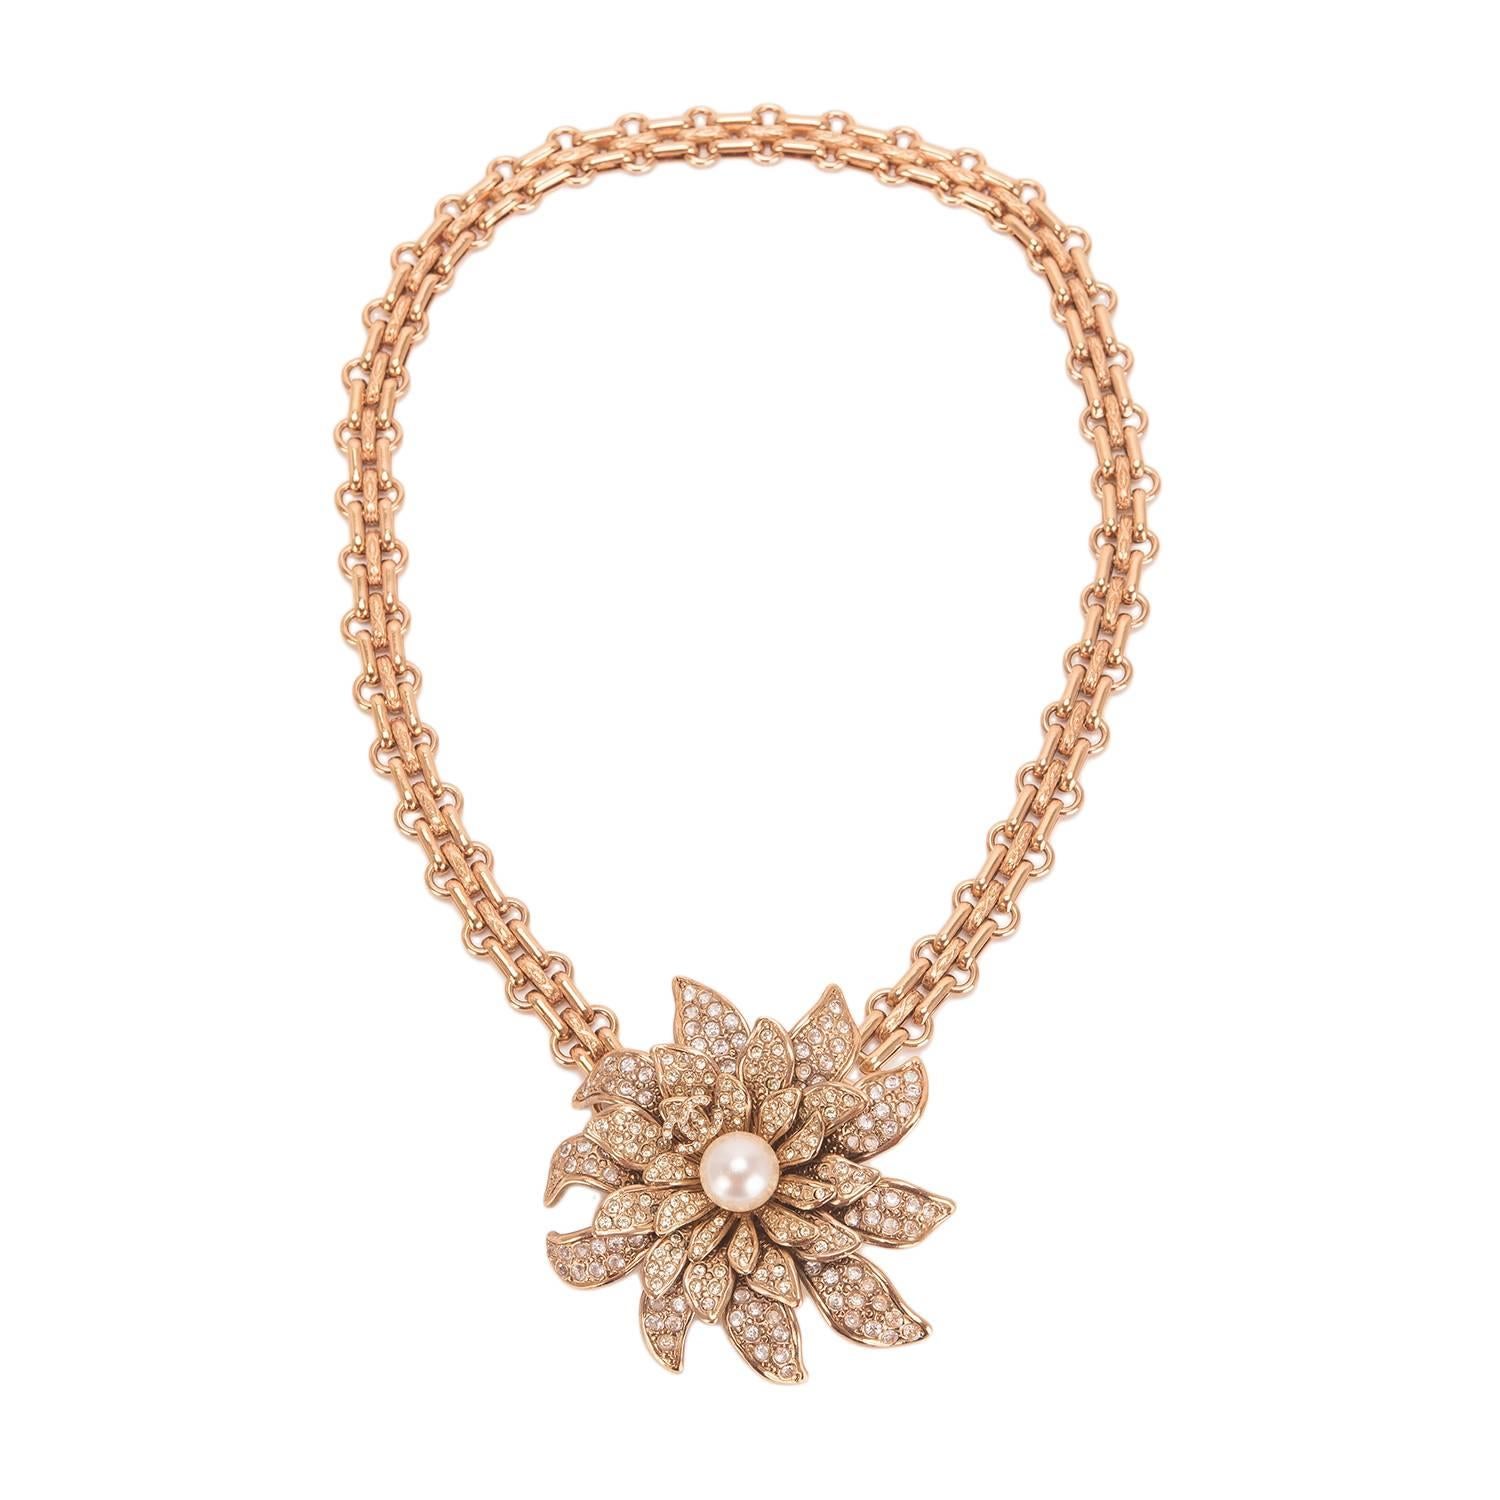 Chanel gold tone choker with large rhinestone embedded gold tone camellia flower pendant with CC logo and large faux pearl at center and hidden hook closure.

Collection: 05A

Condition: Mint

Accompaned By: Chanel box and